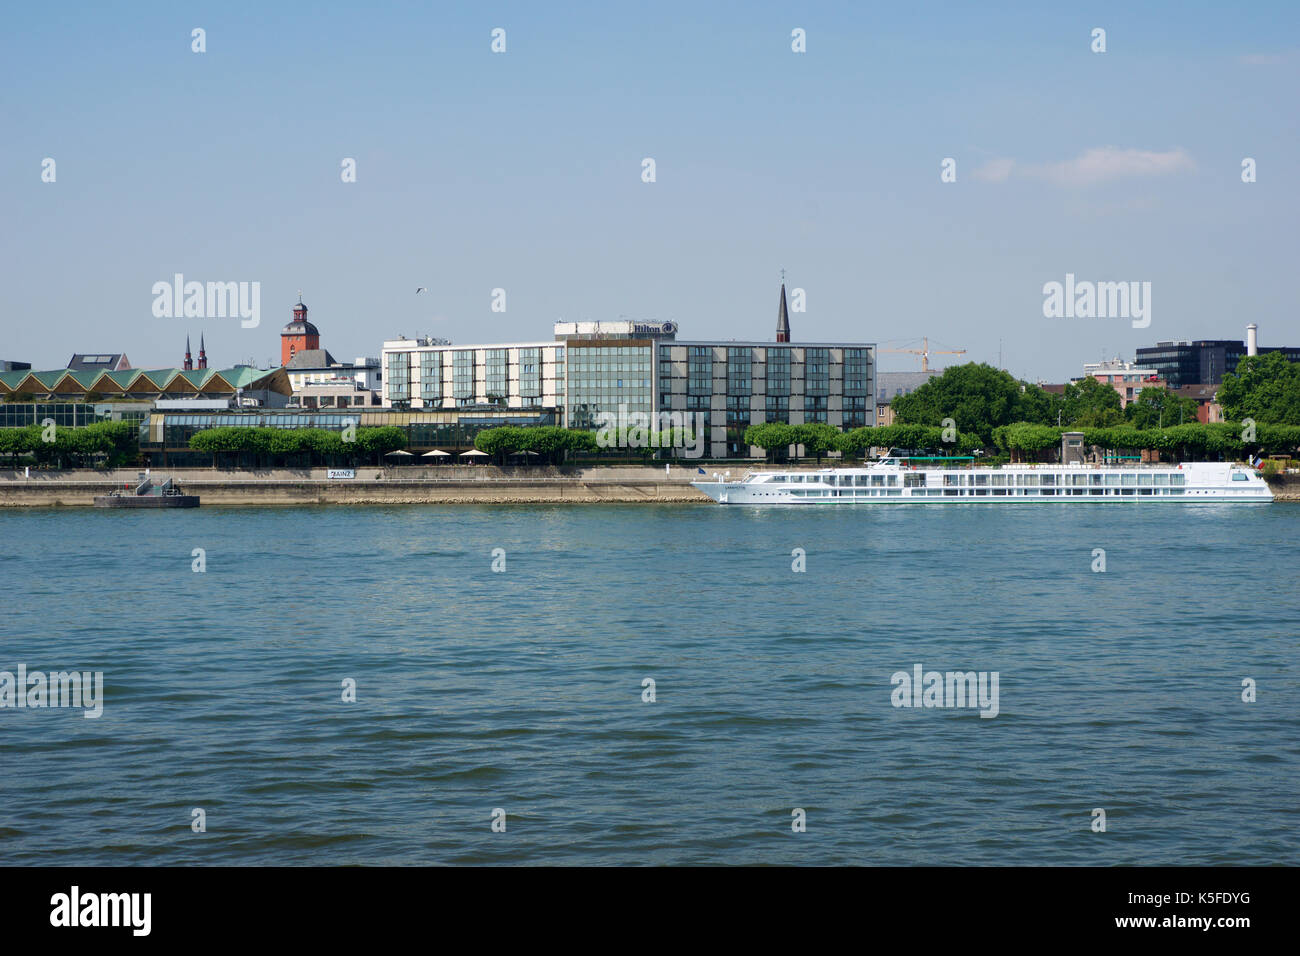 MAINZ, GERMANY - JUL 09th, 2017: Luxury Hilton Hotel next to the Rhine german Rhein. Outside view from the opposite river side. Hilton Hotels Resorts is an international chain of full service hotels and resorts of Hilton Worldwide. Stock Photo